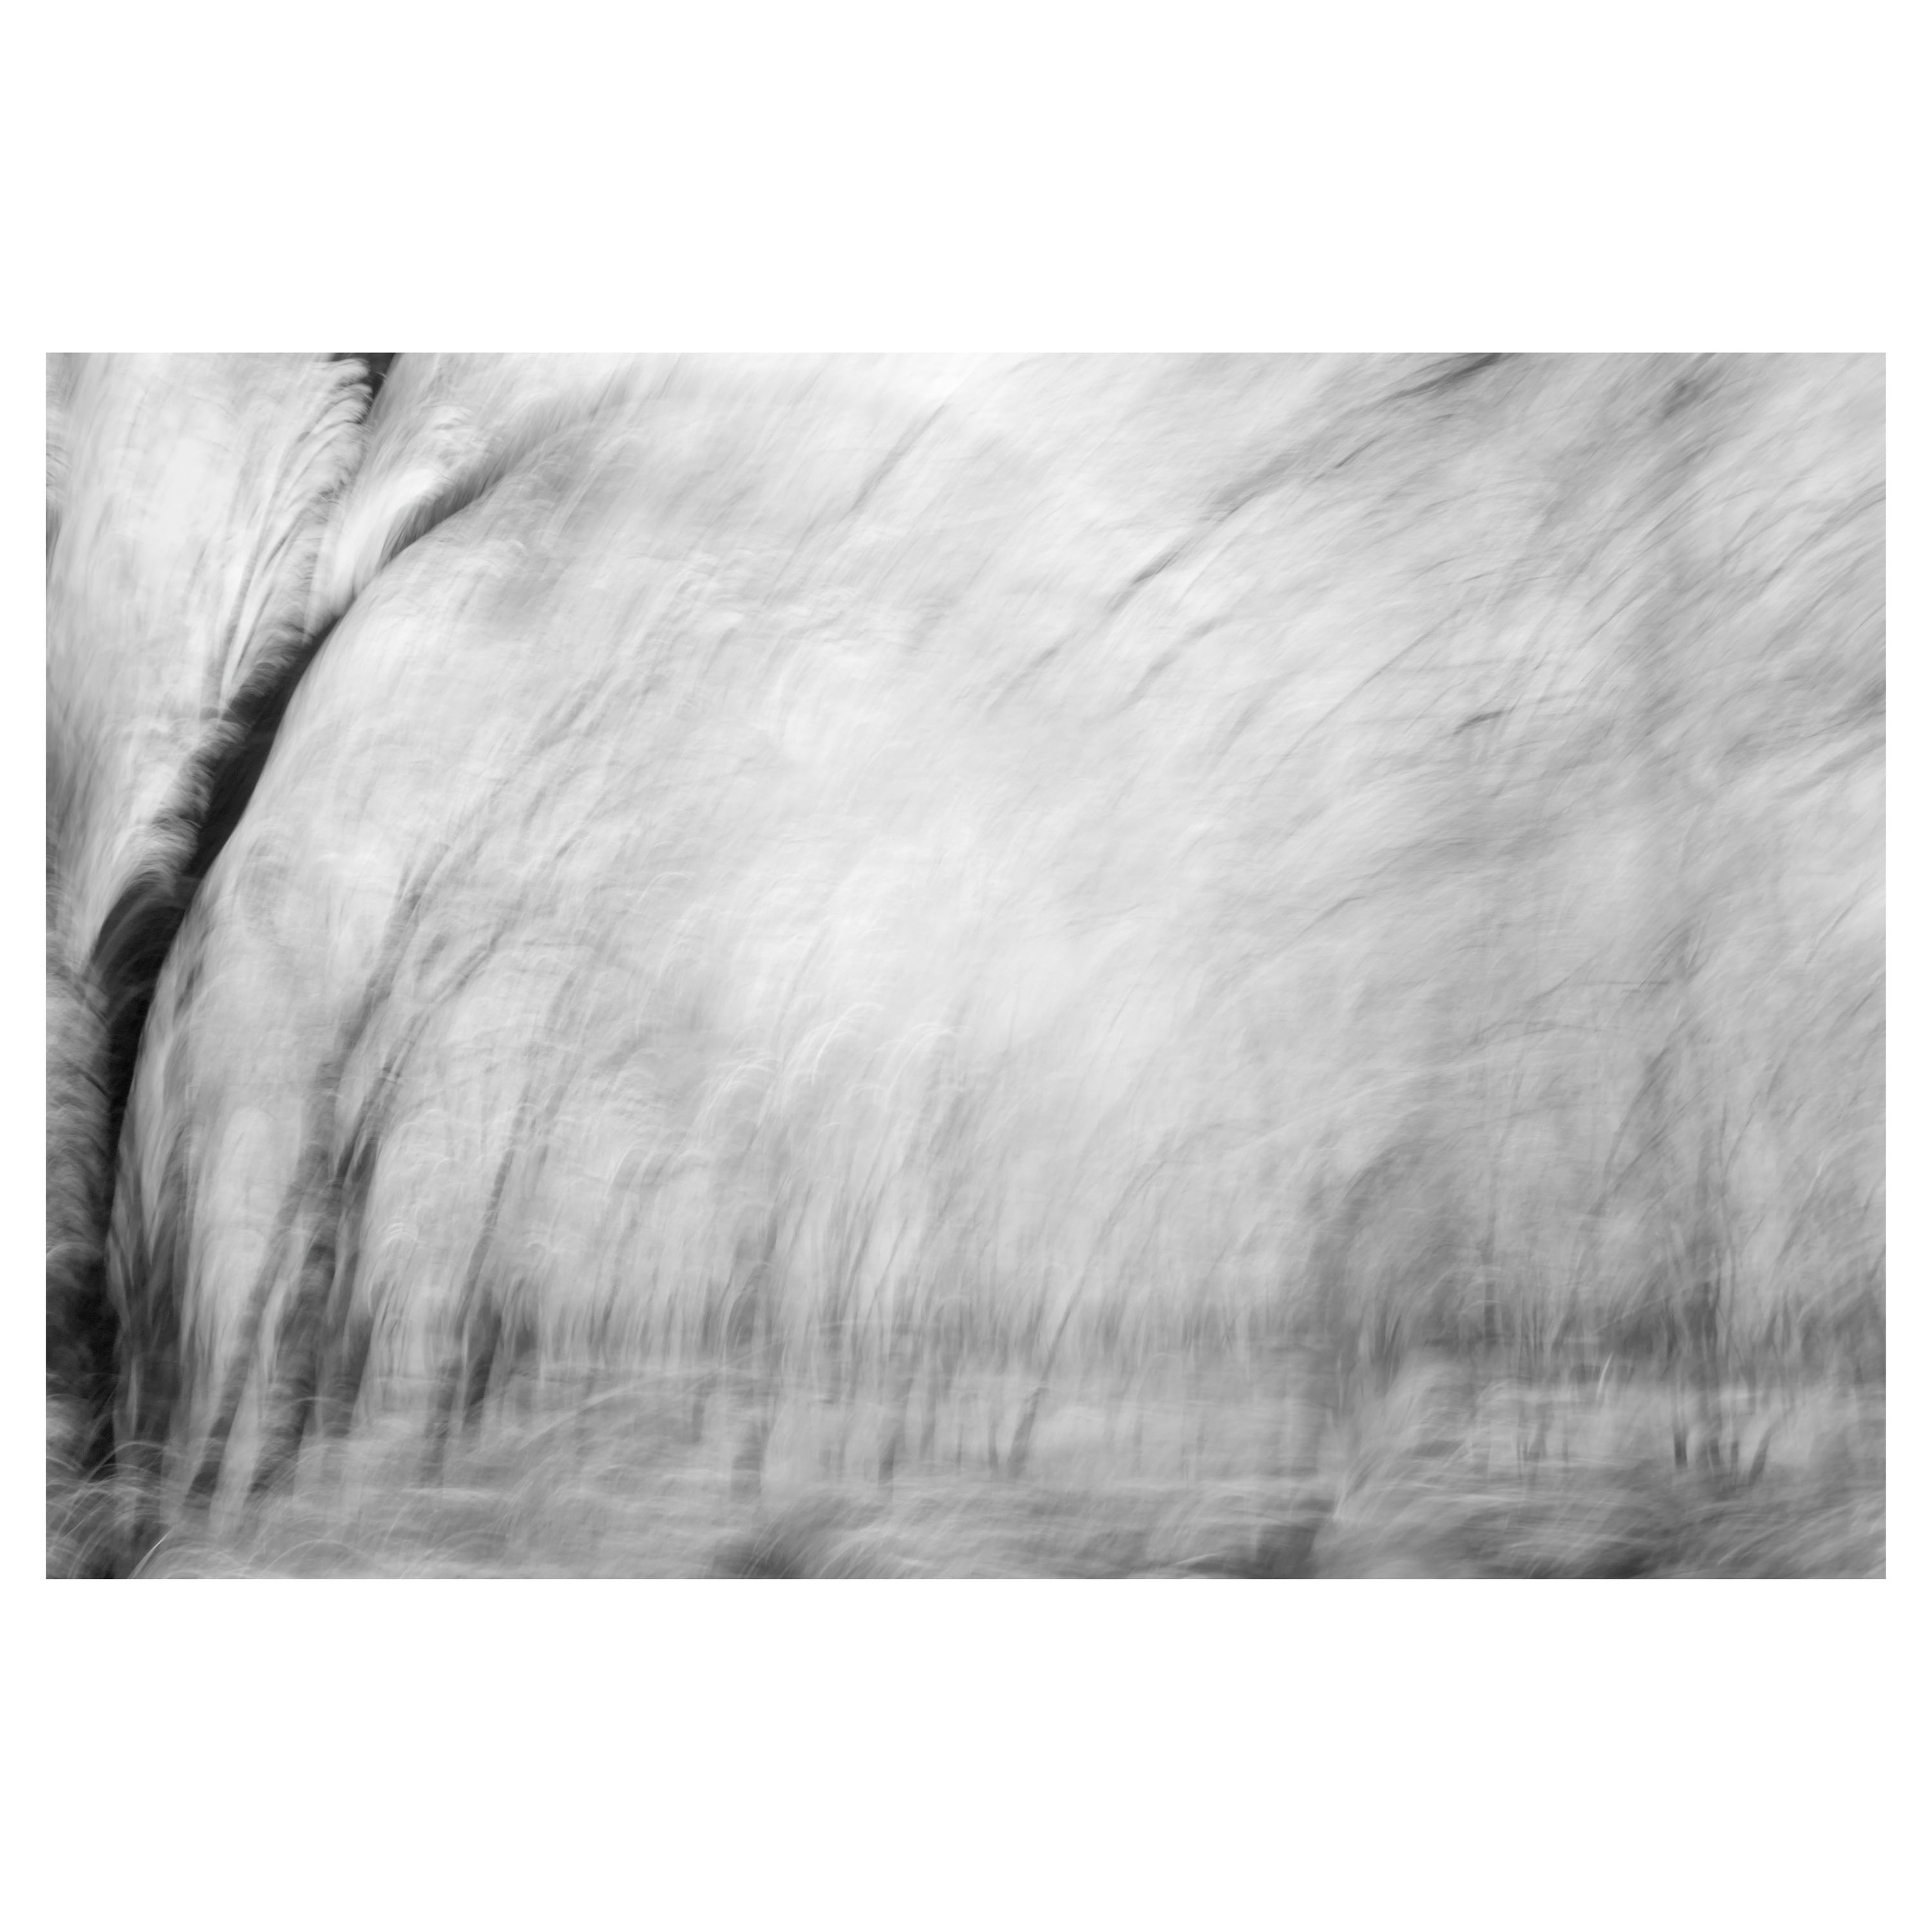 Aditya Dicky Singh Abstract Photograph -  Landscape Photograph Nature Large Abstract Trees Wildlife India Black White